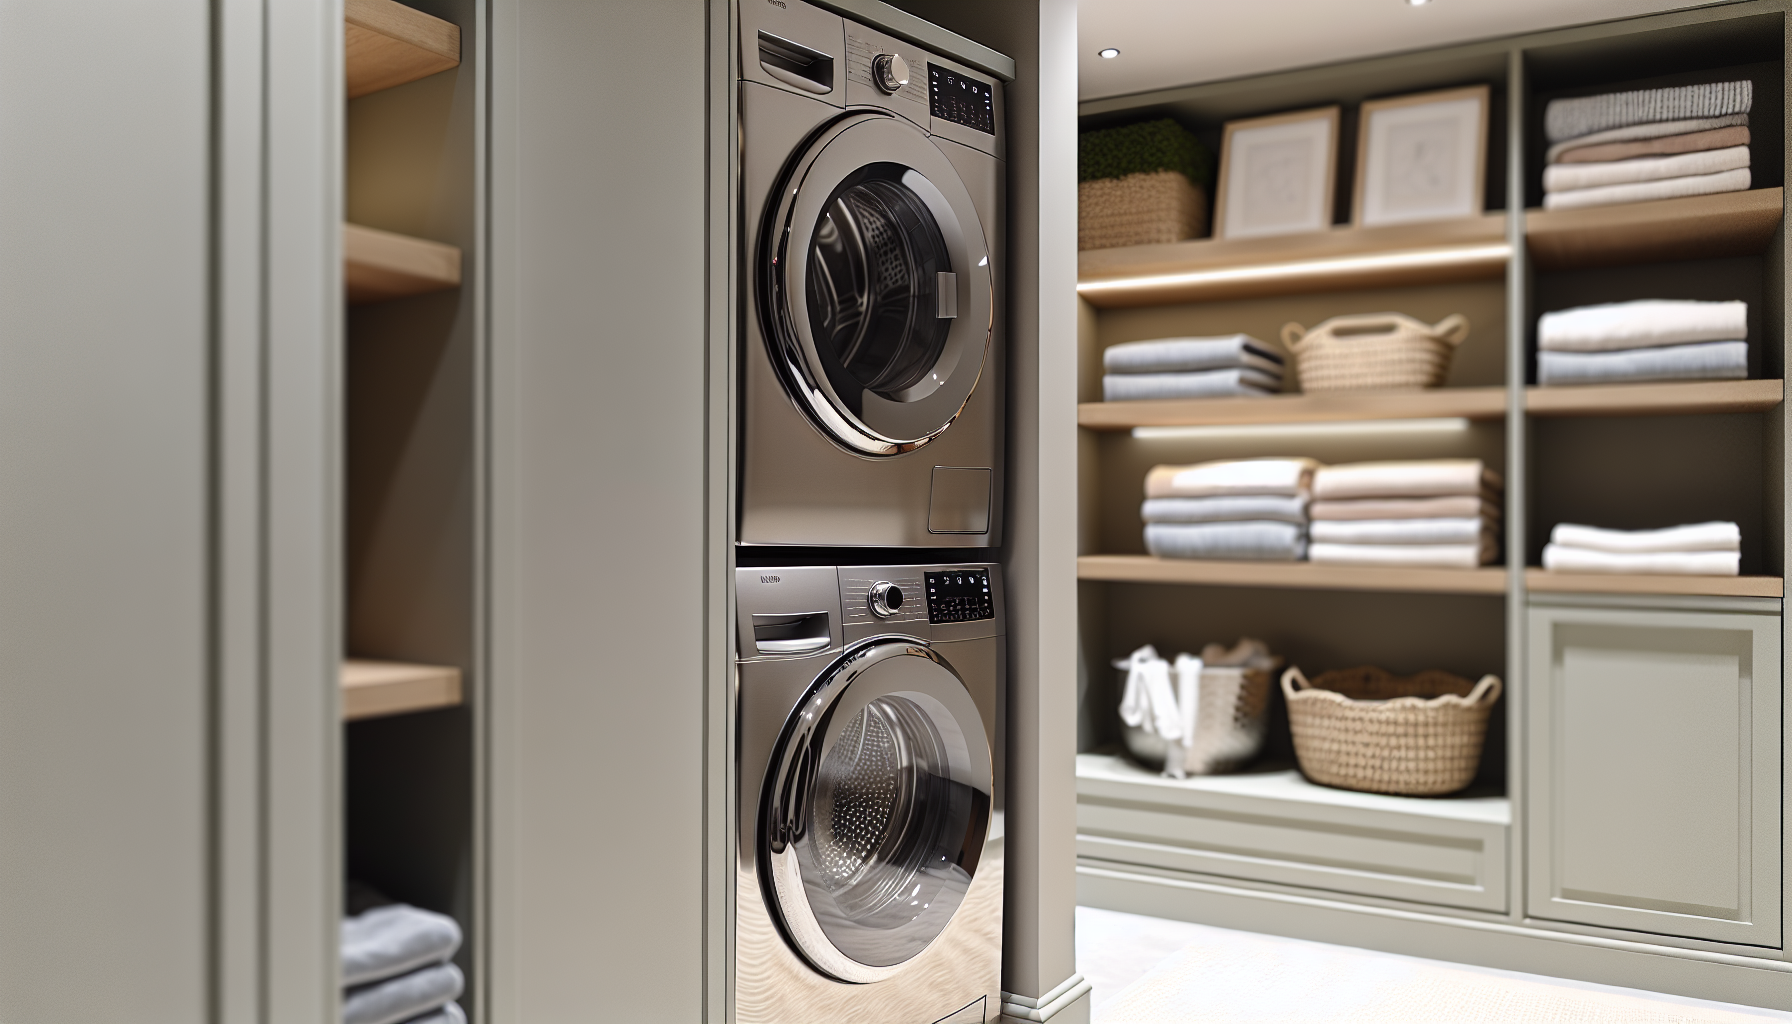 Stackable washer and dryer in a compact laundry room